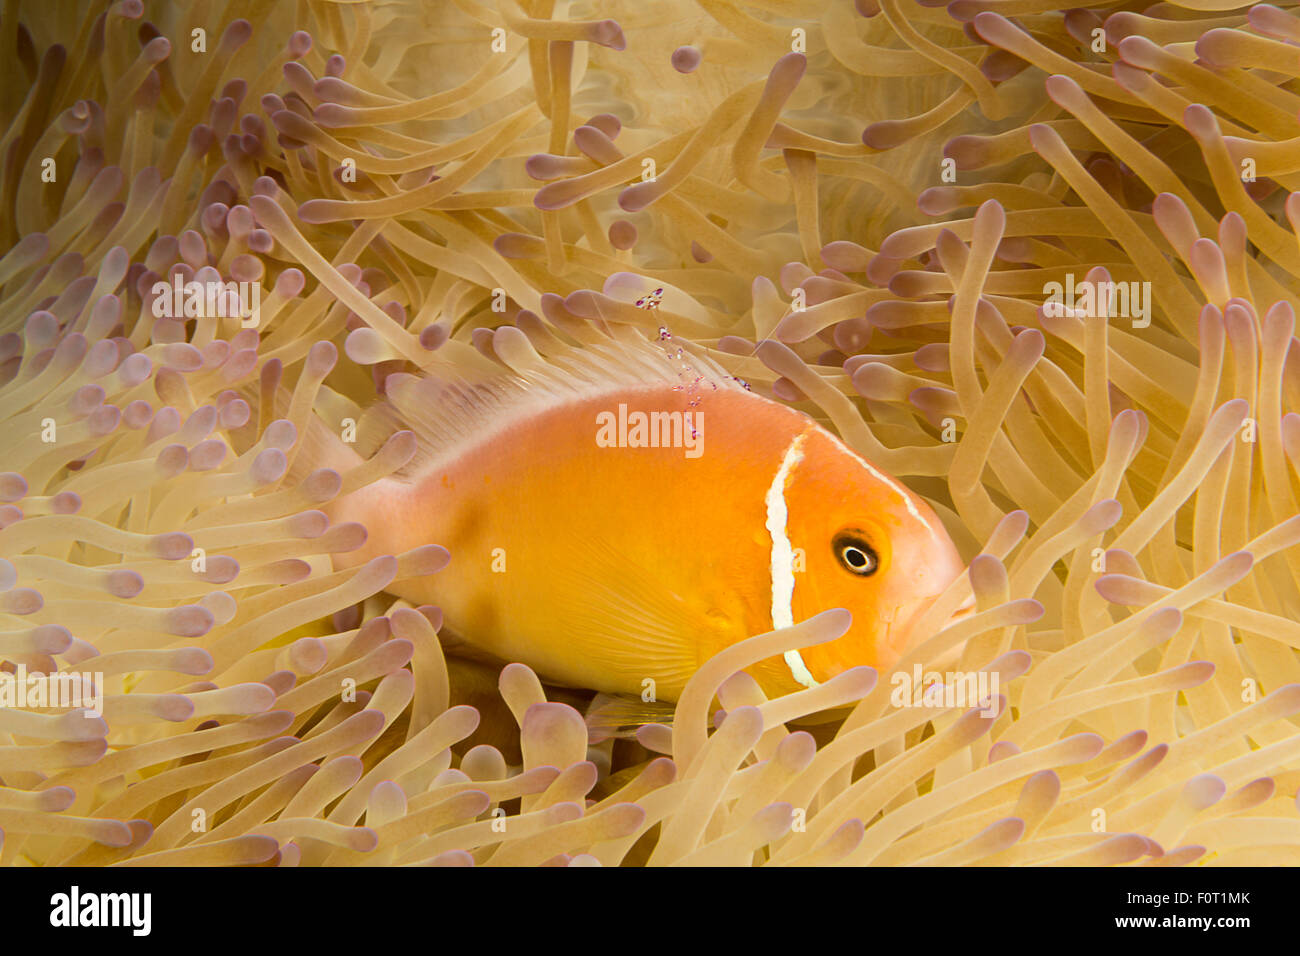 This common anemonefish, Amphiprion perideraion, is most often found associated with the anemone, Heteractis magnifica, as pictu Stock Photo